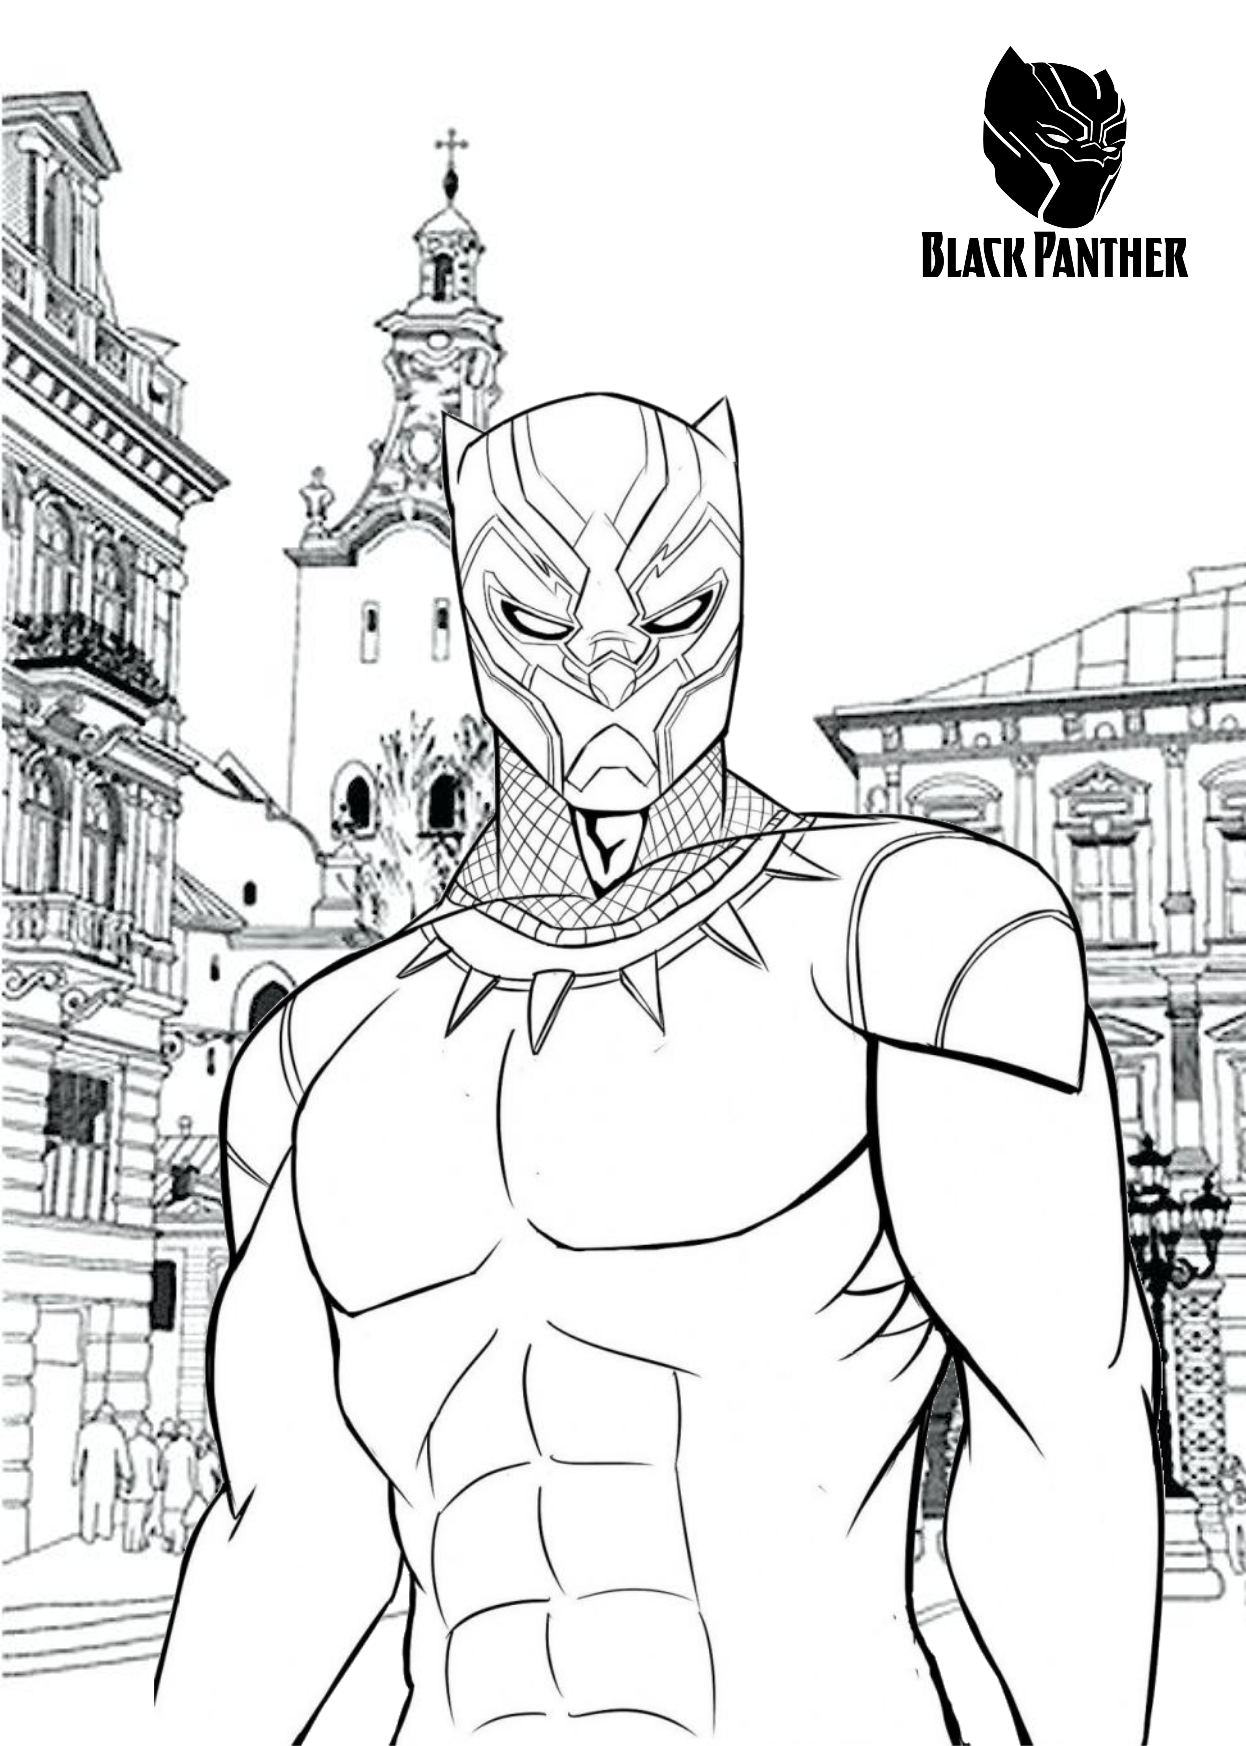 Black panther marvel comics character printable coloring ...